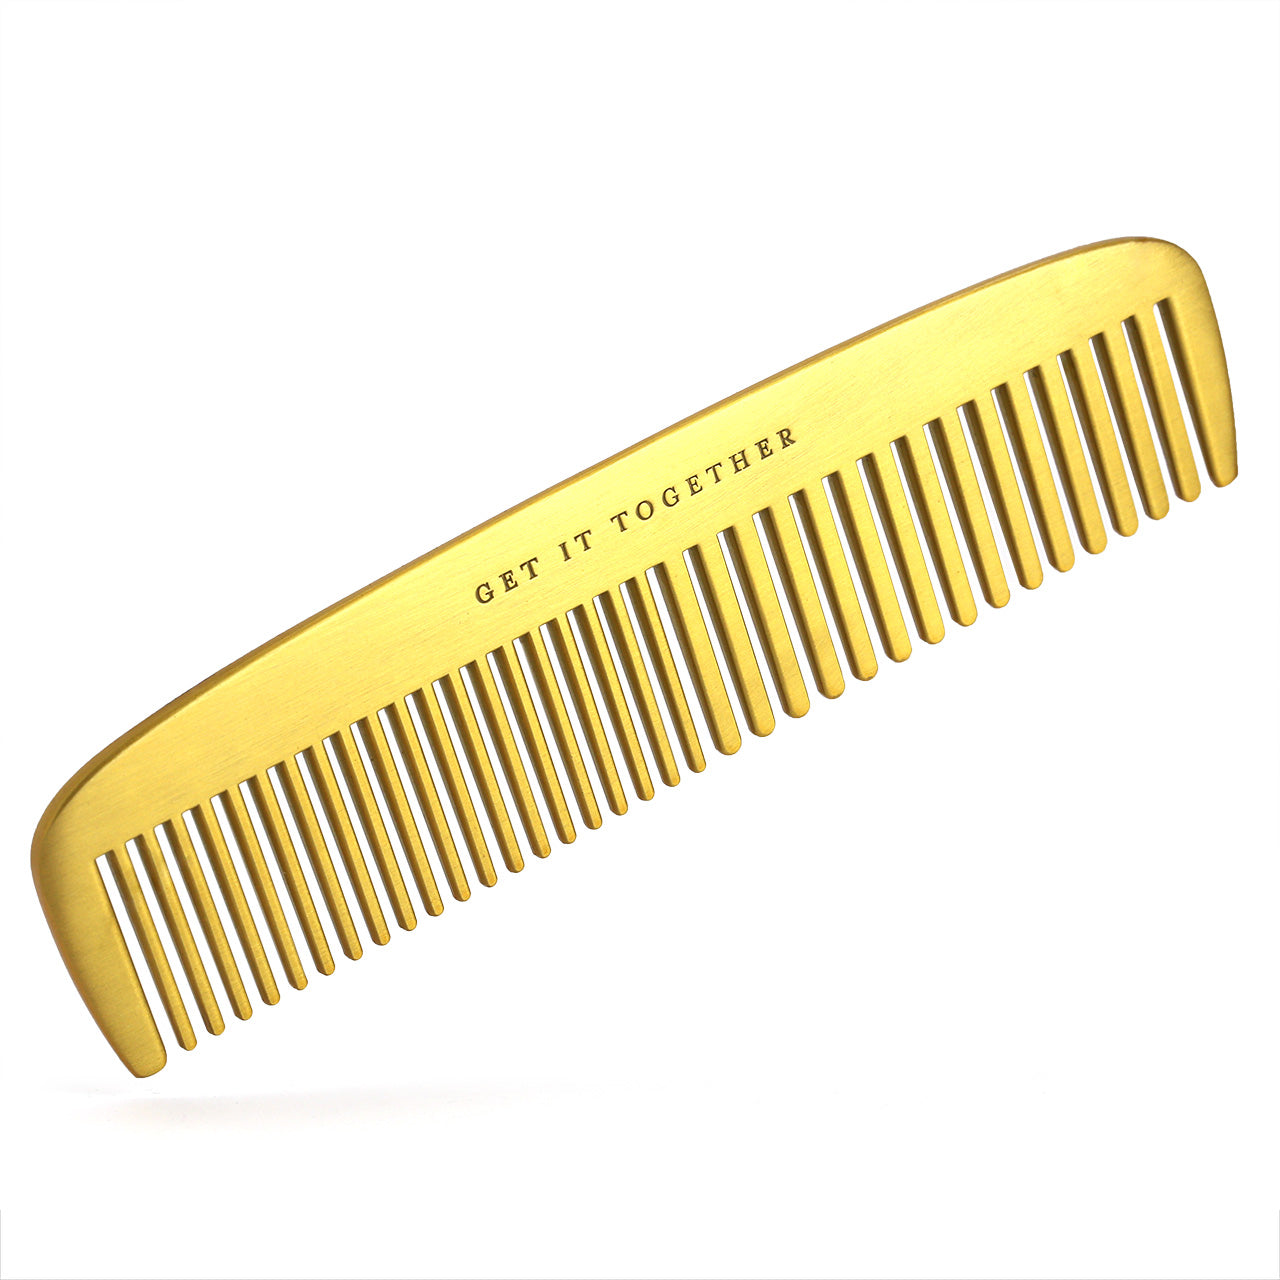 "Get it Together" engraved Brass comb